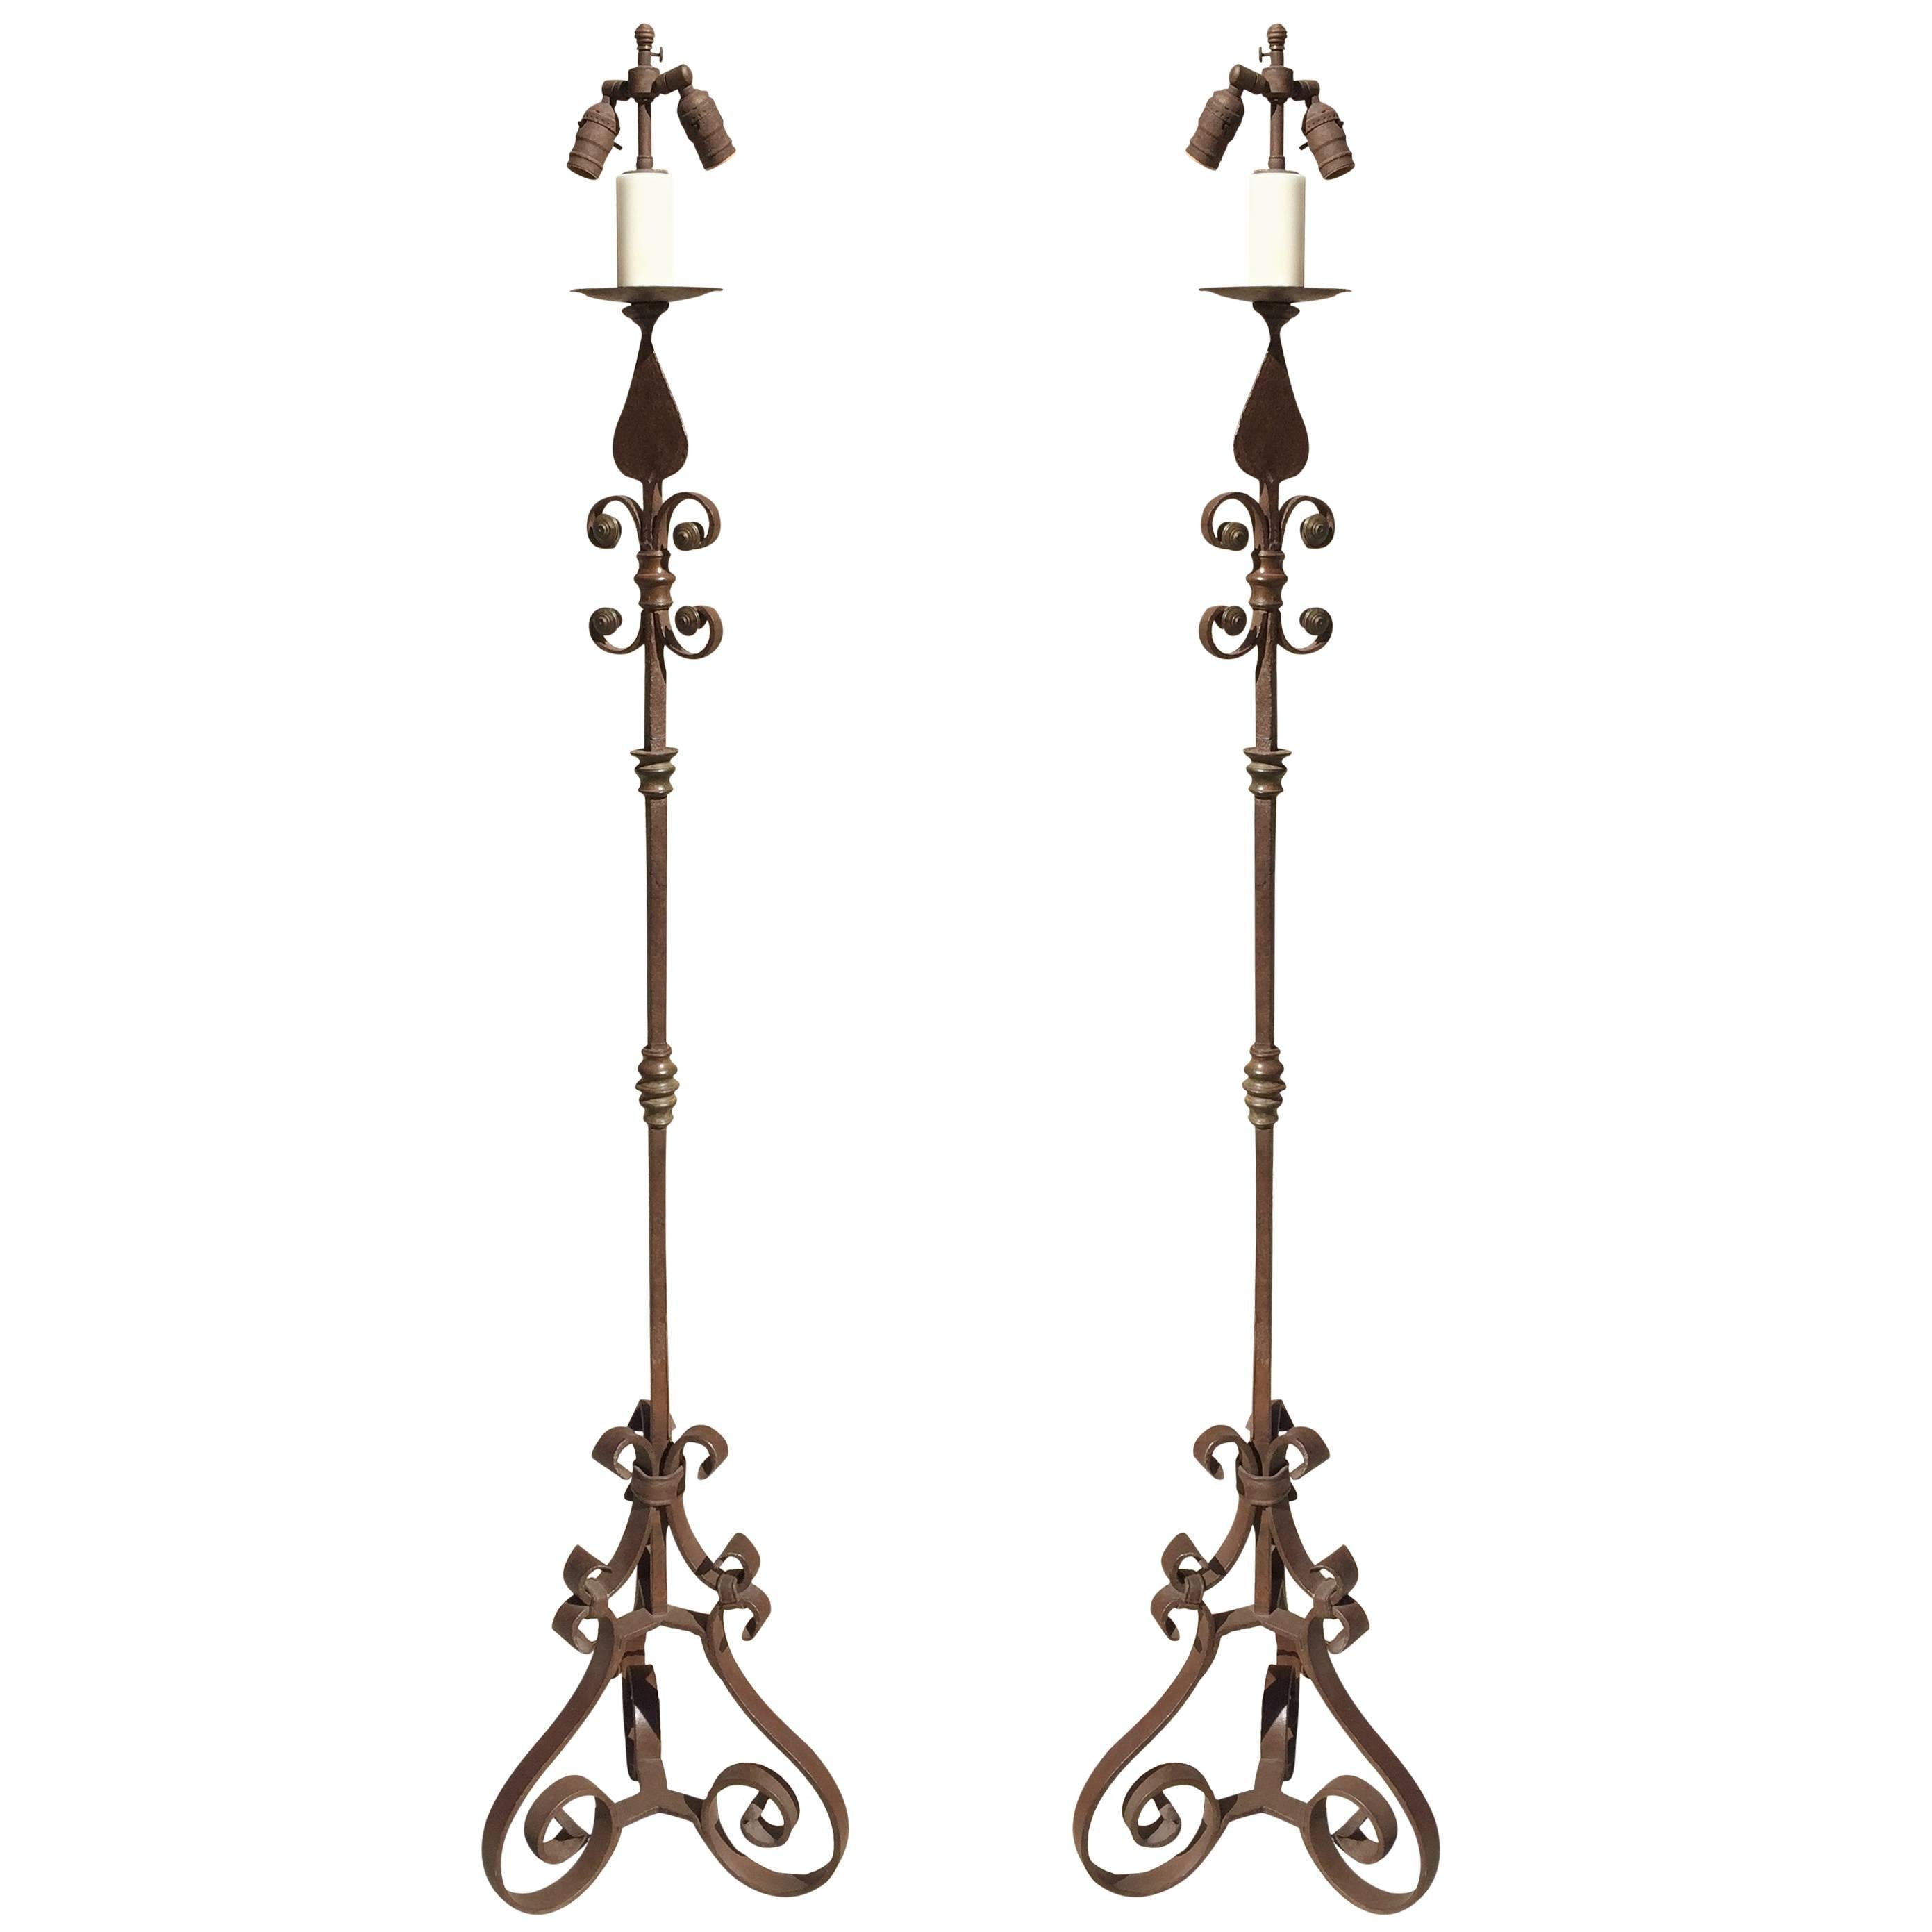 Pair of American Arts and Crafts Wrought Iron Floor Lamps For Sale